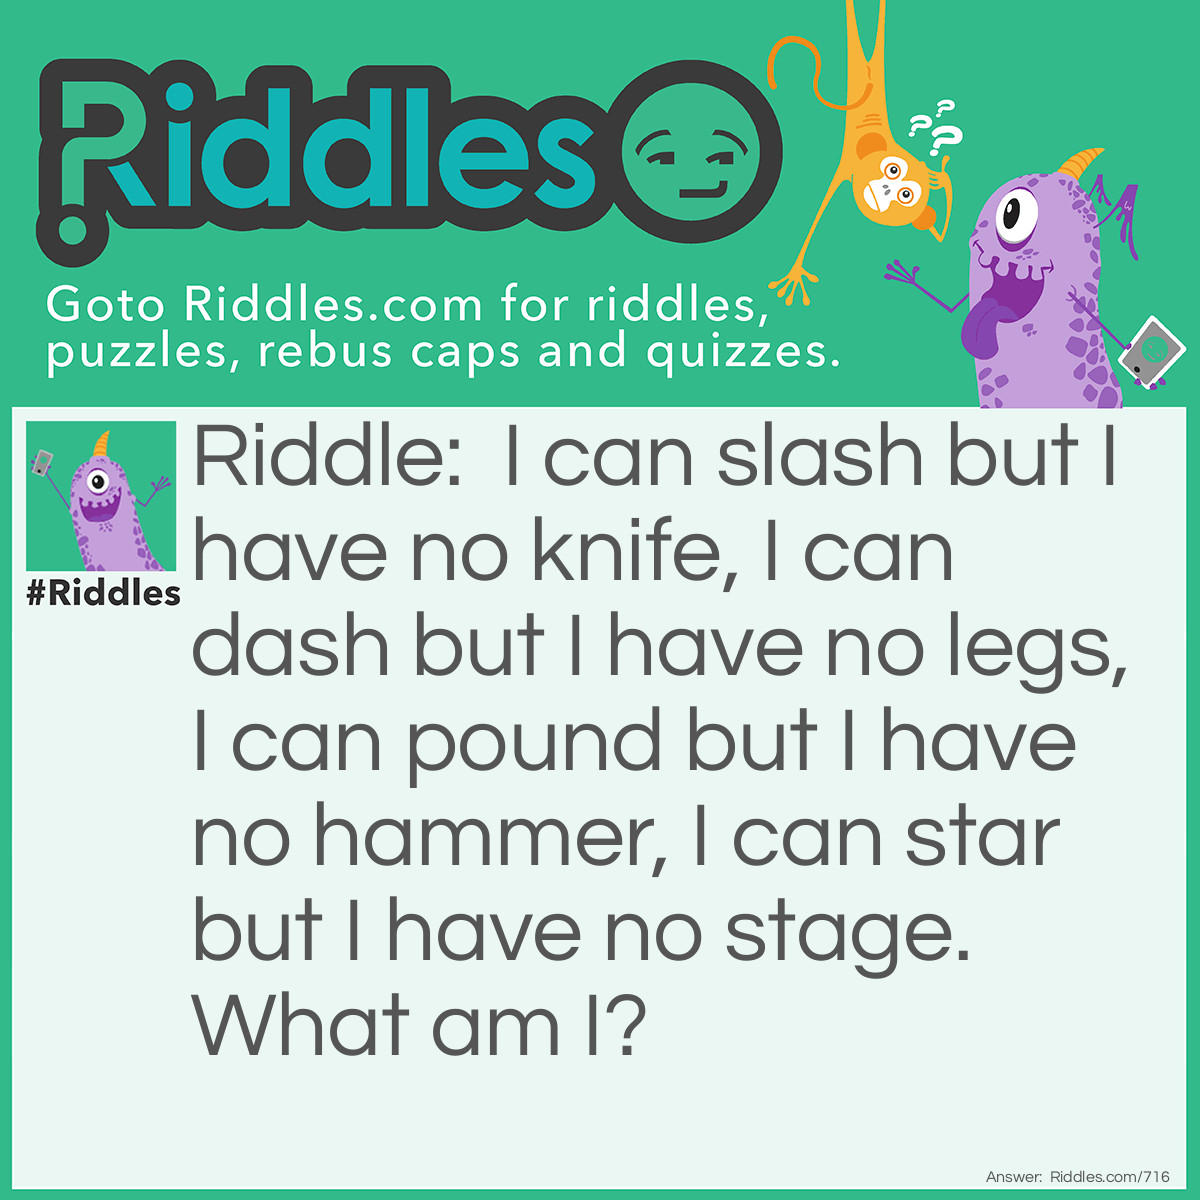 Riddle: I can slash but I have no knife, I can dash but I have no legs, I can pound but I have no hammer, I can star but I have no stage.
What am I? Answer: A Keyboard.